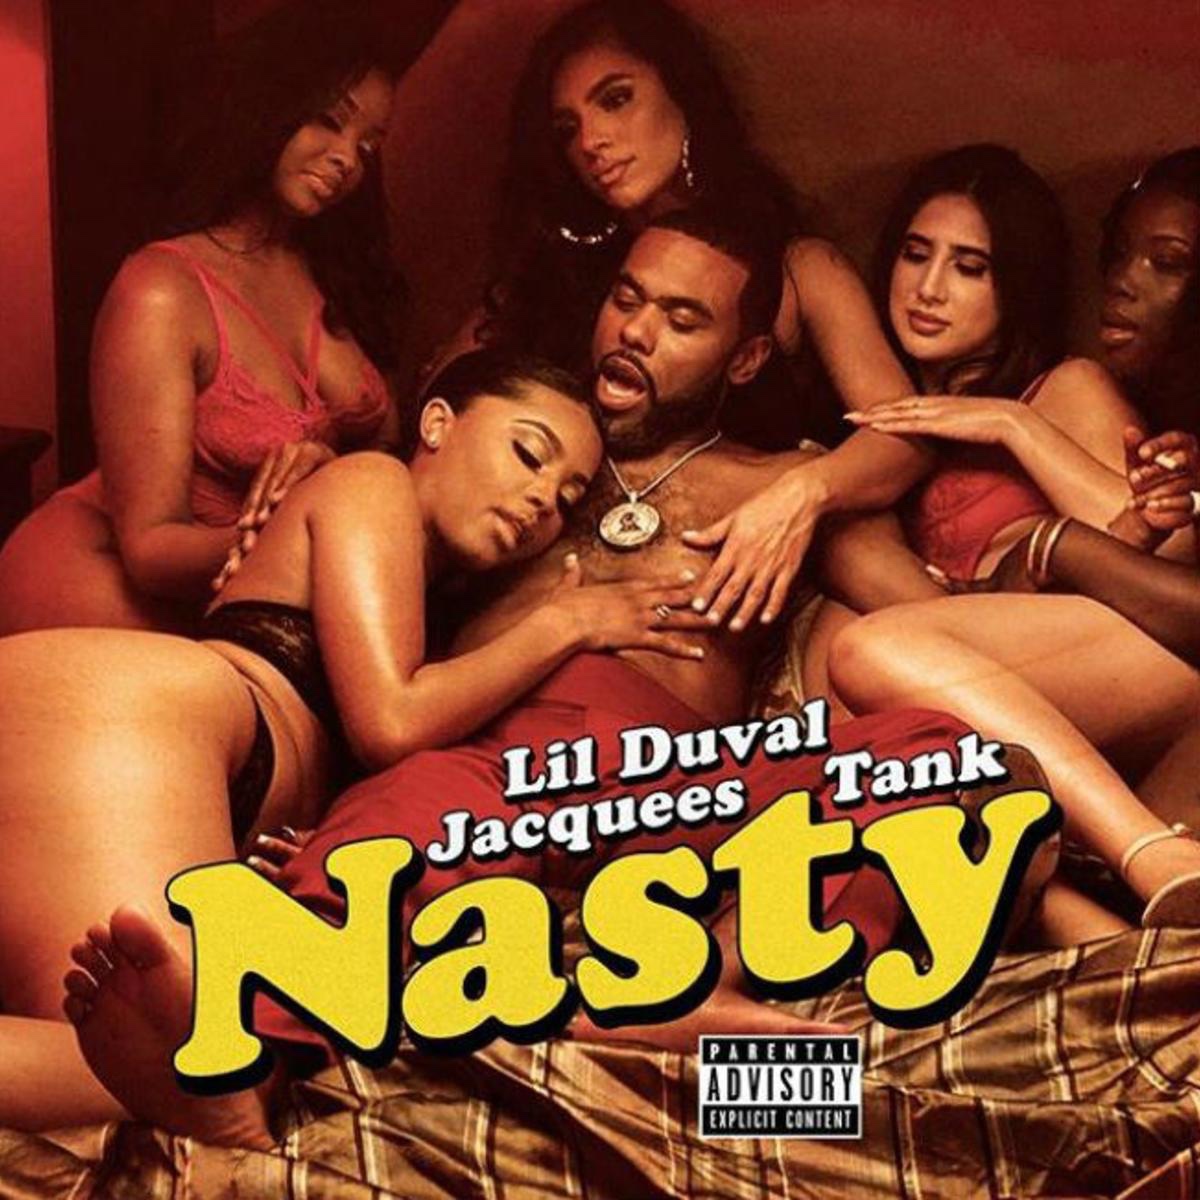 Lil Duval, Tank & Jacquees Get “Nasty” In New Single